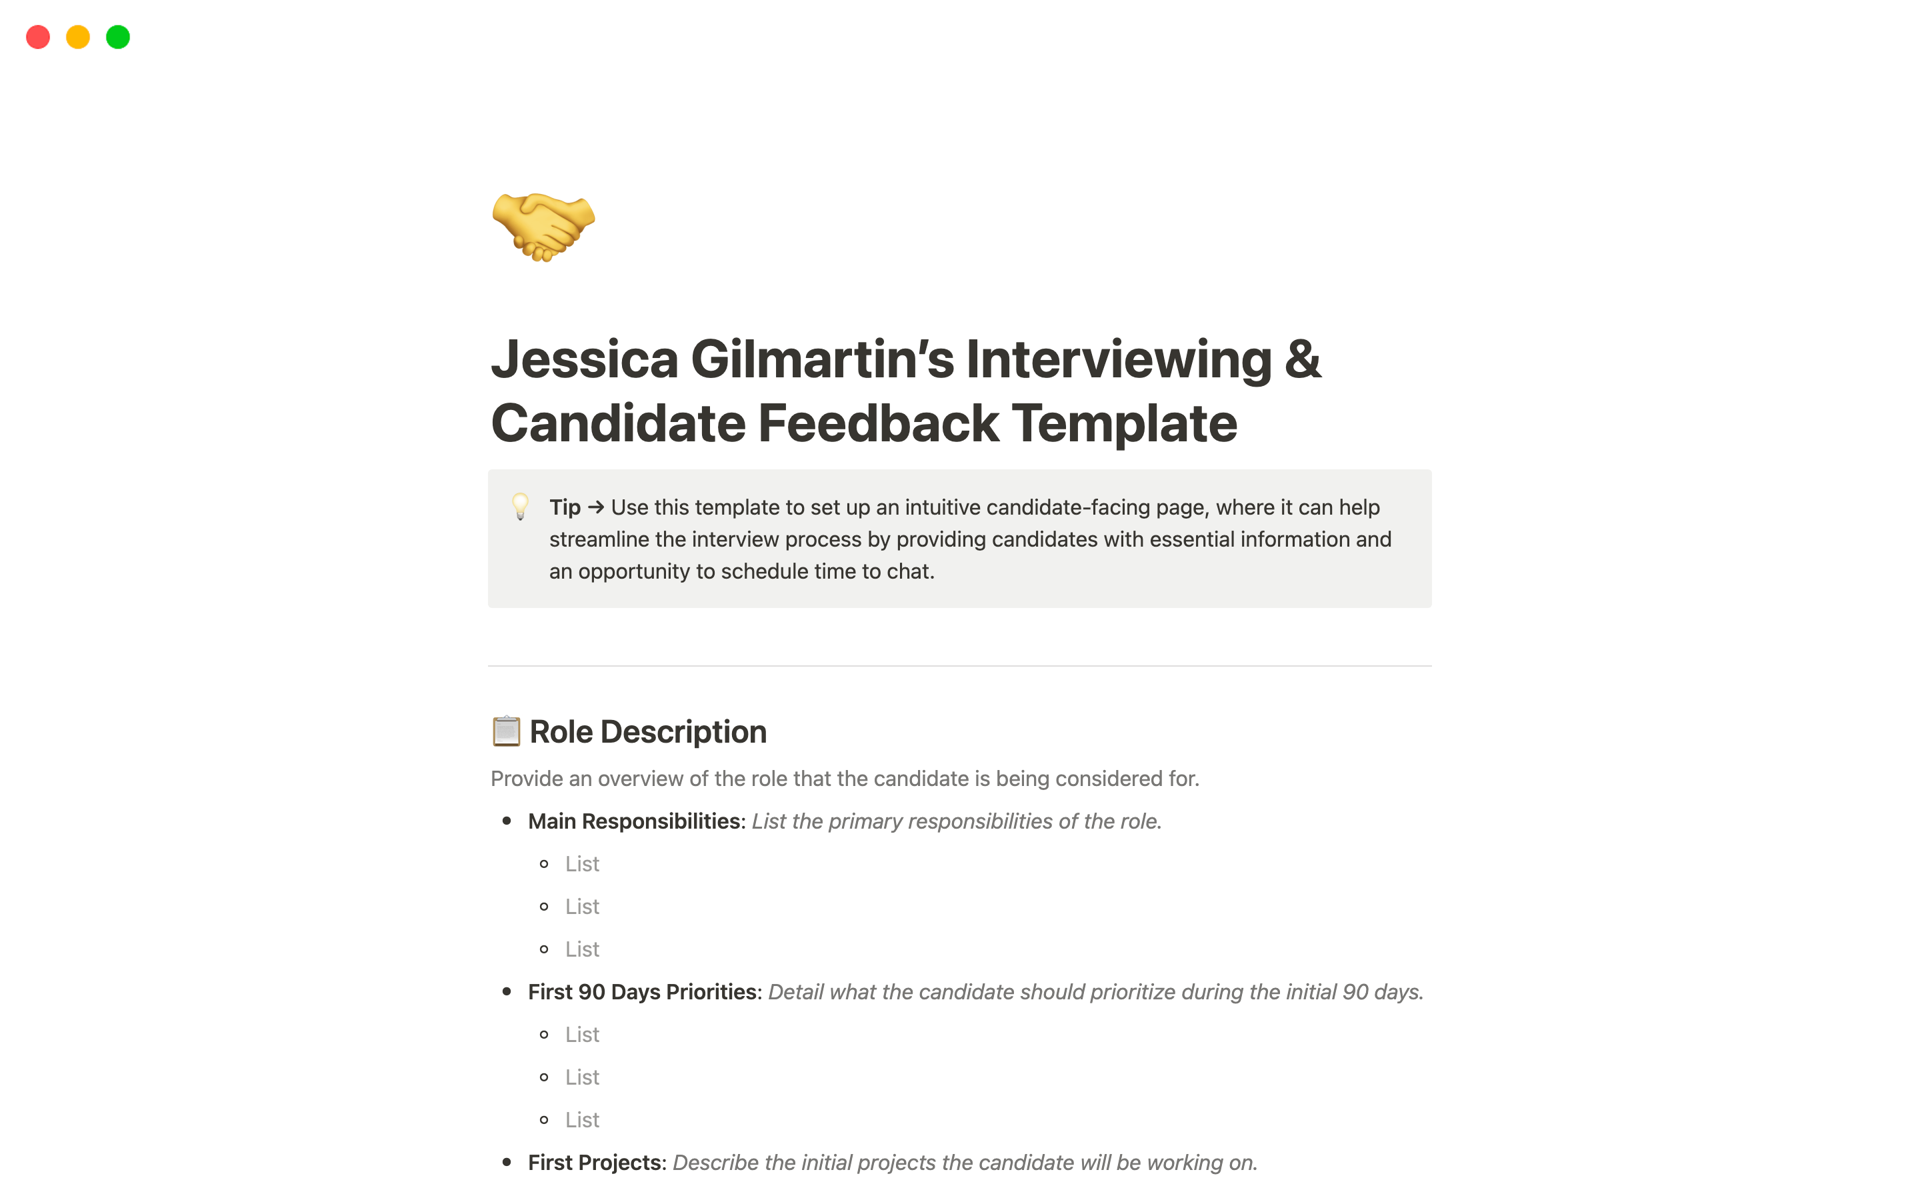 Optimize the interview process with this candidate-facing page template.